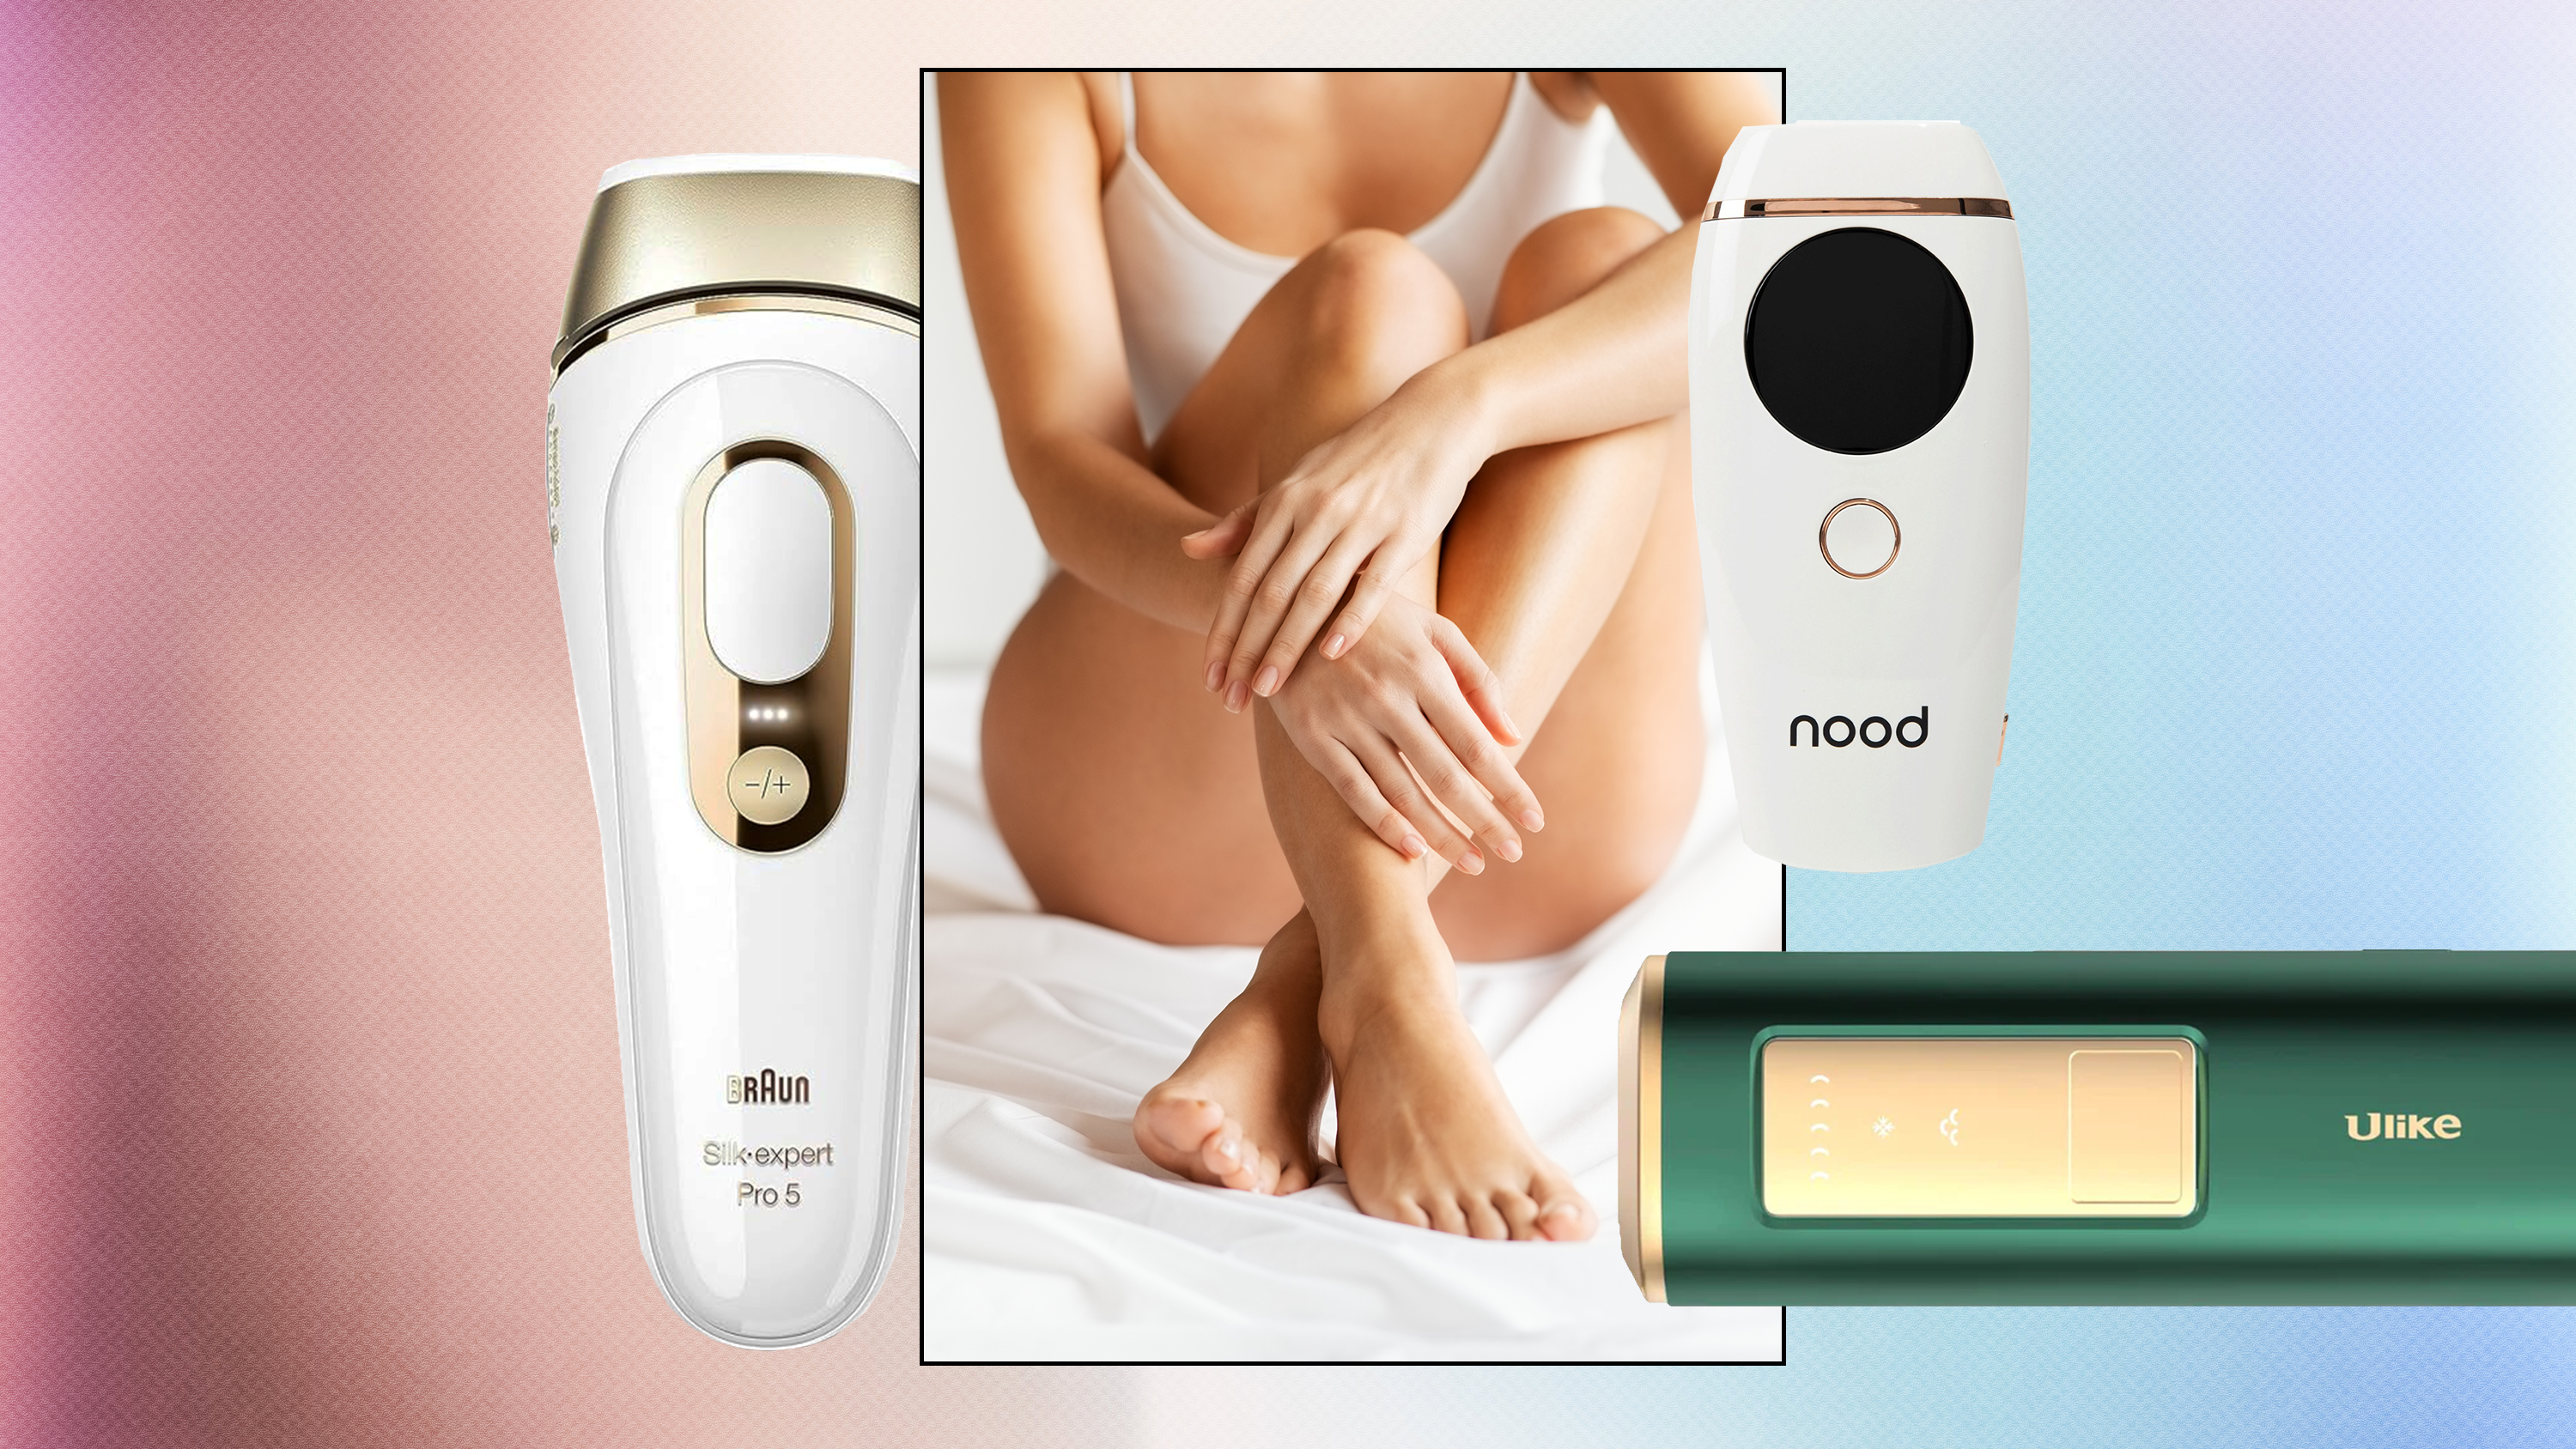 I'm an IPL expert and these are my top tips for great hair removal results